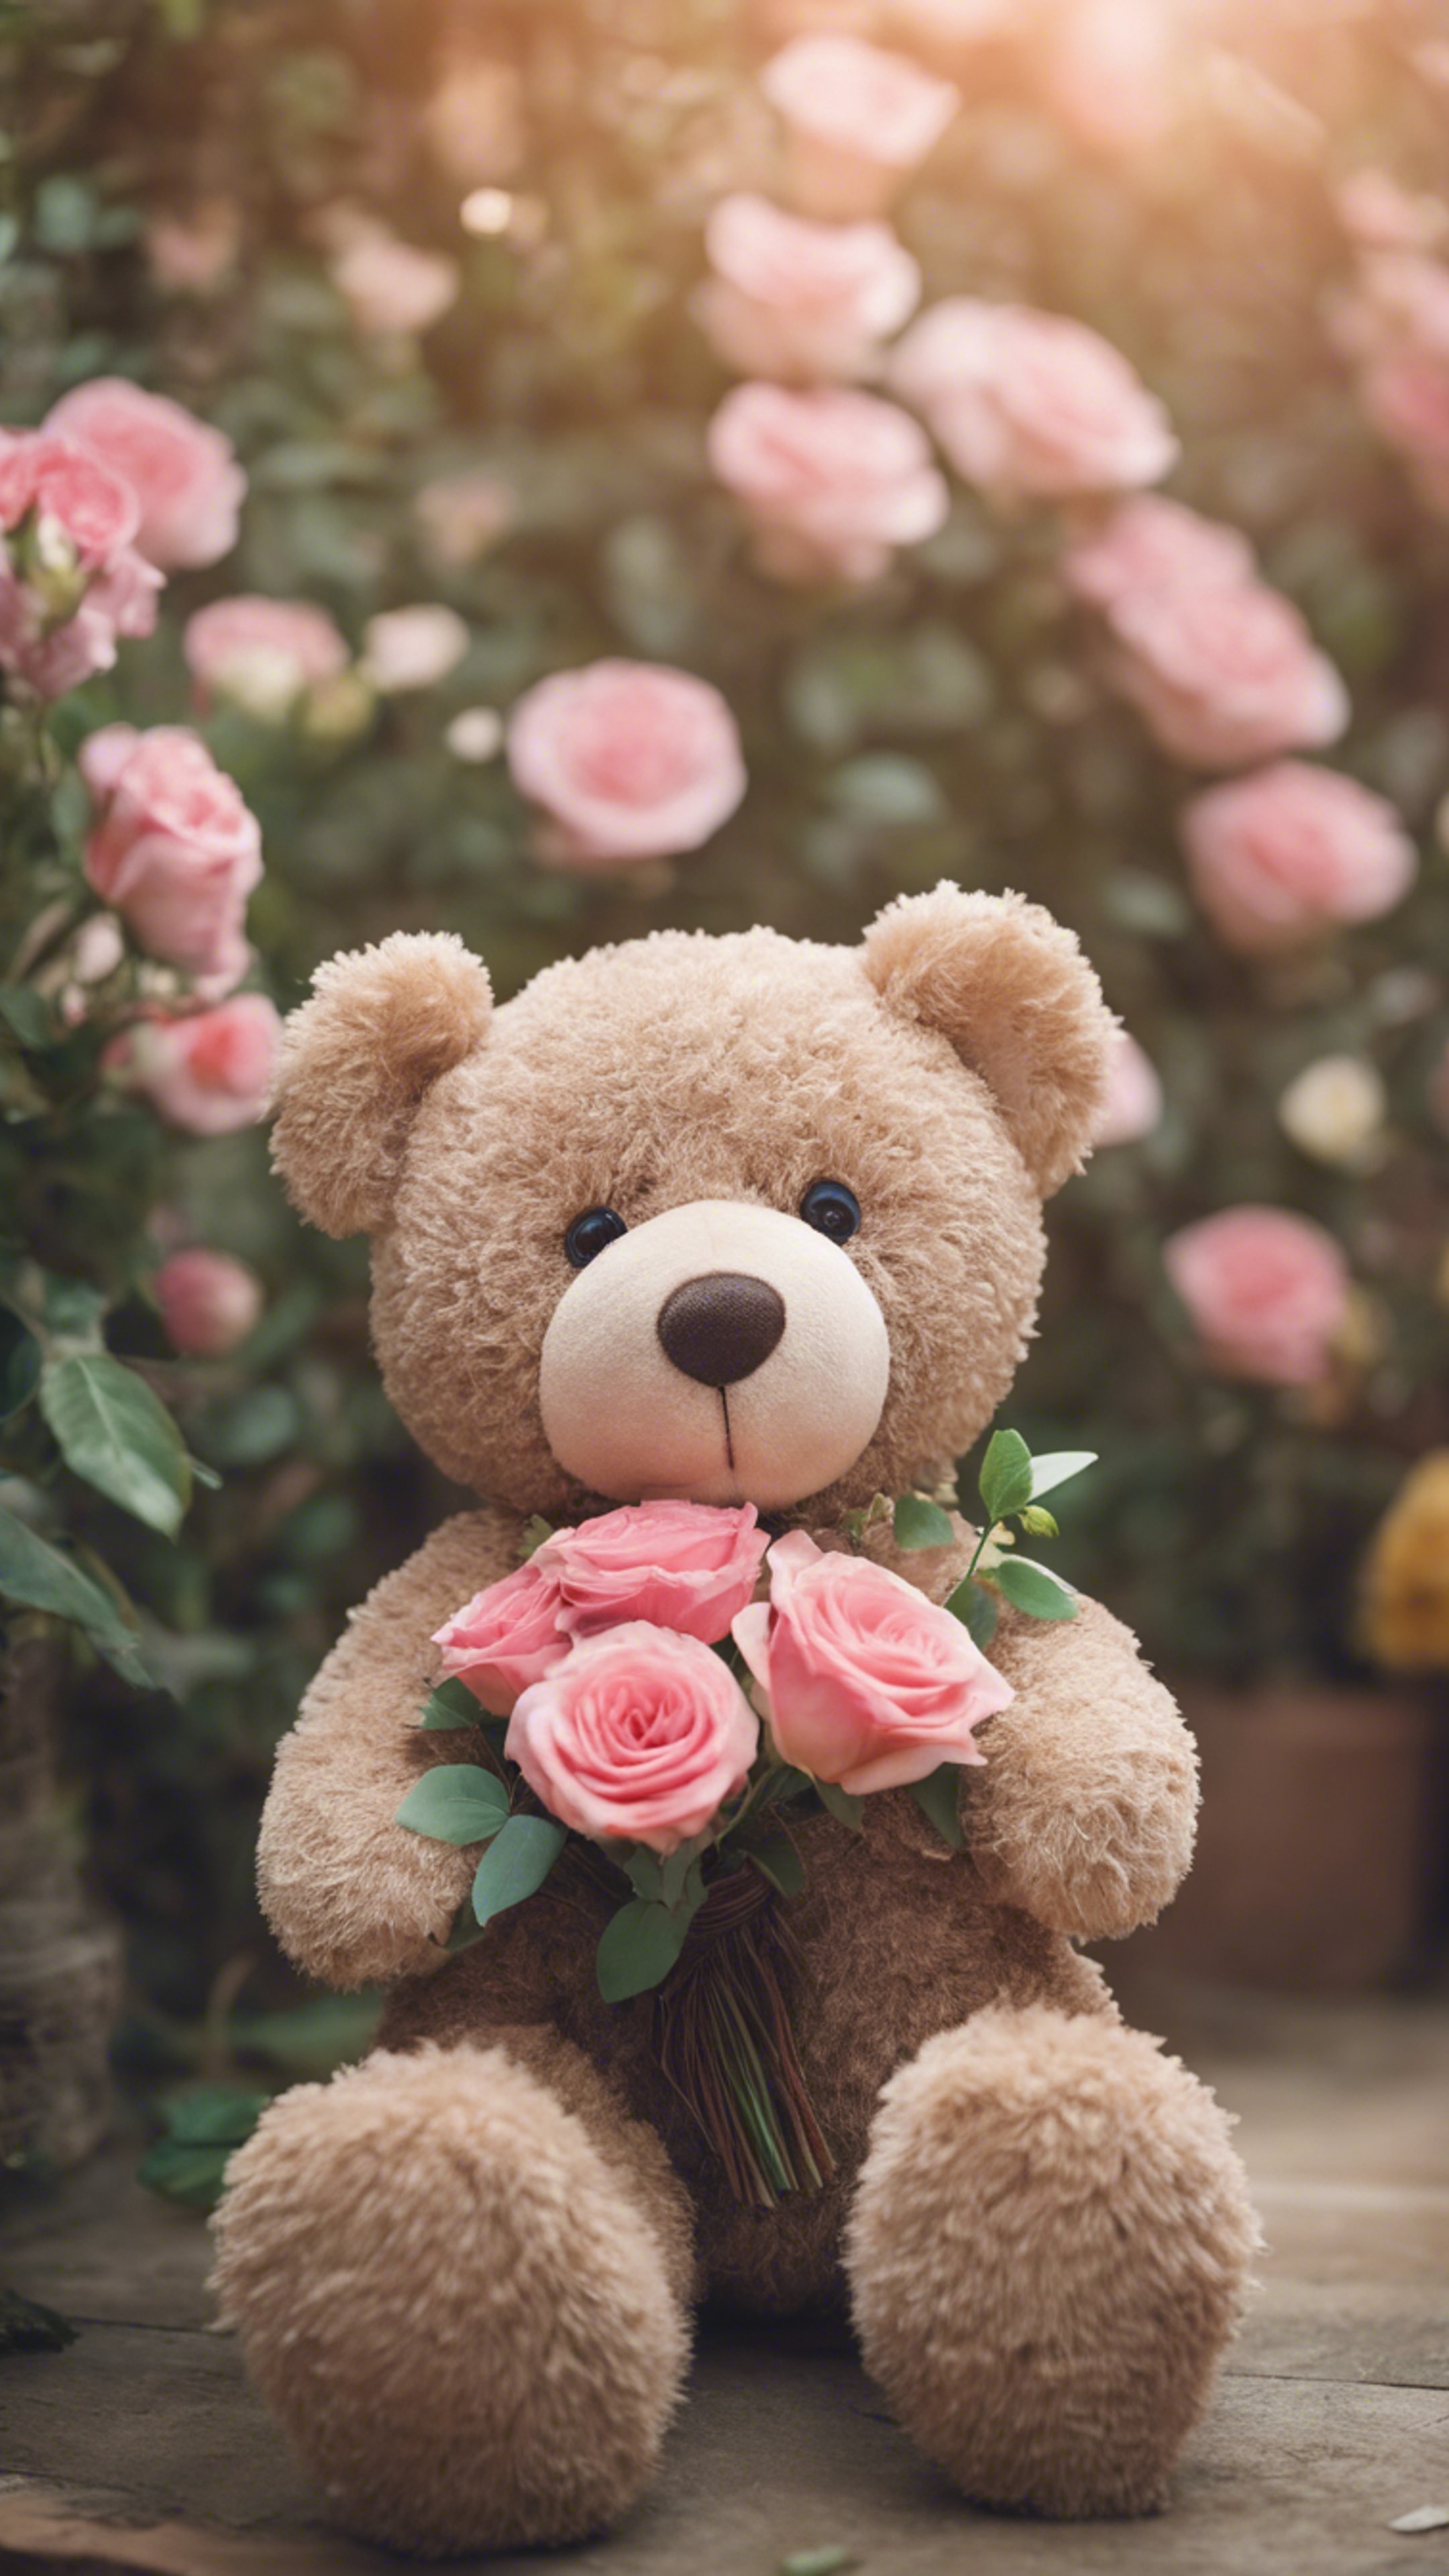 A teddy bear in a romantic setting, holding a bouquet of roses. Tapéta[0c0a94ba405548b0bff3]